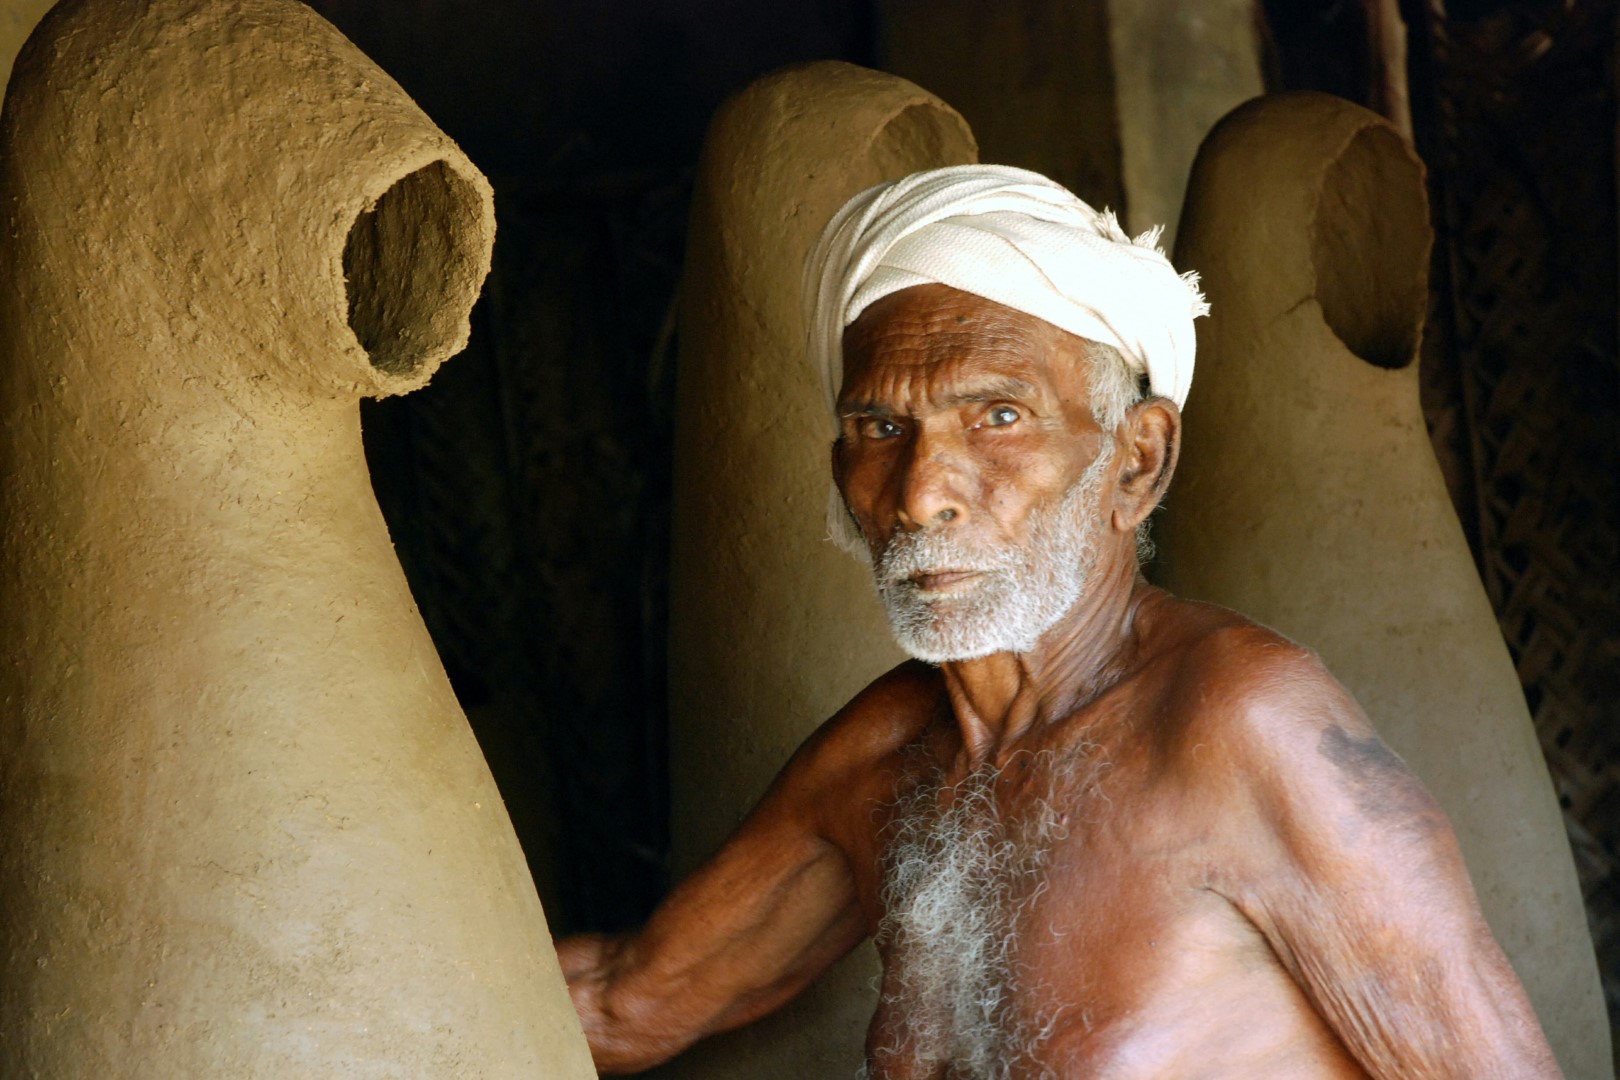 <span style="font-weight:normal;">Manikam, 87 years old when this photo was taken (2010), in his workshop.</span>